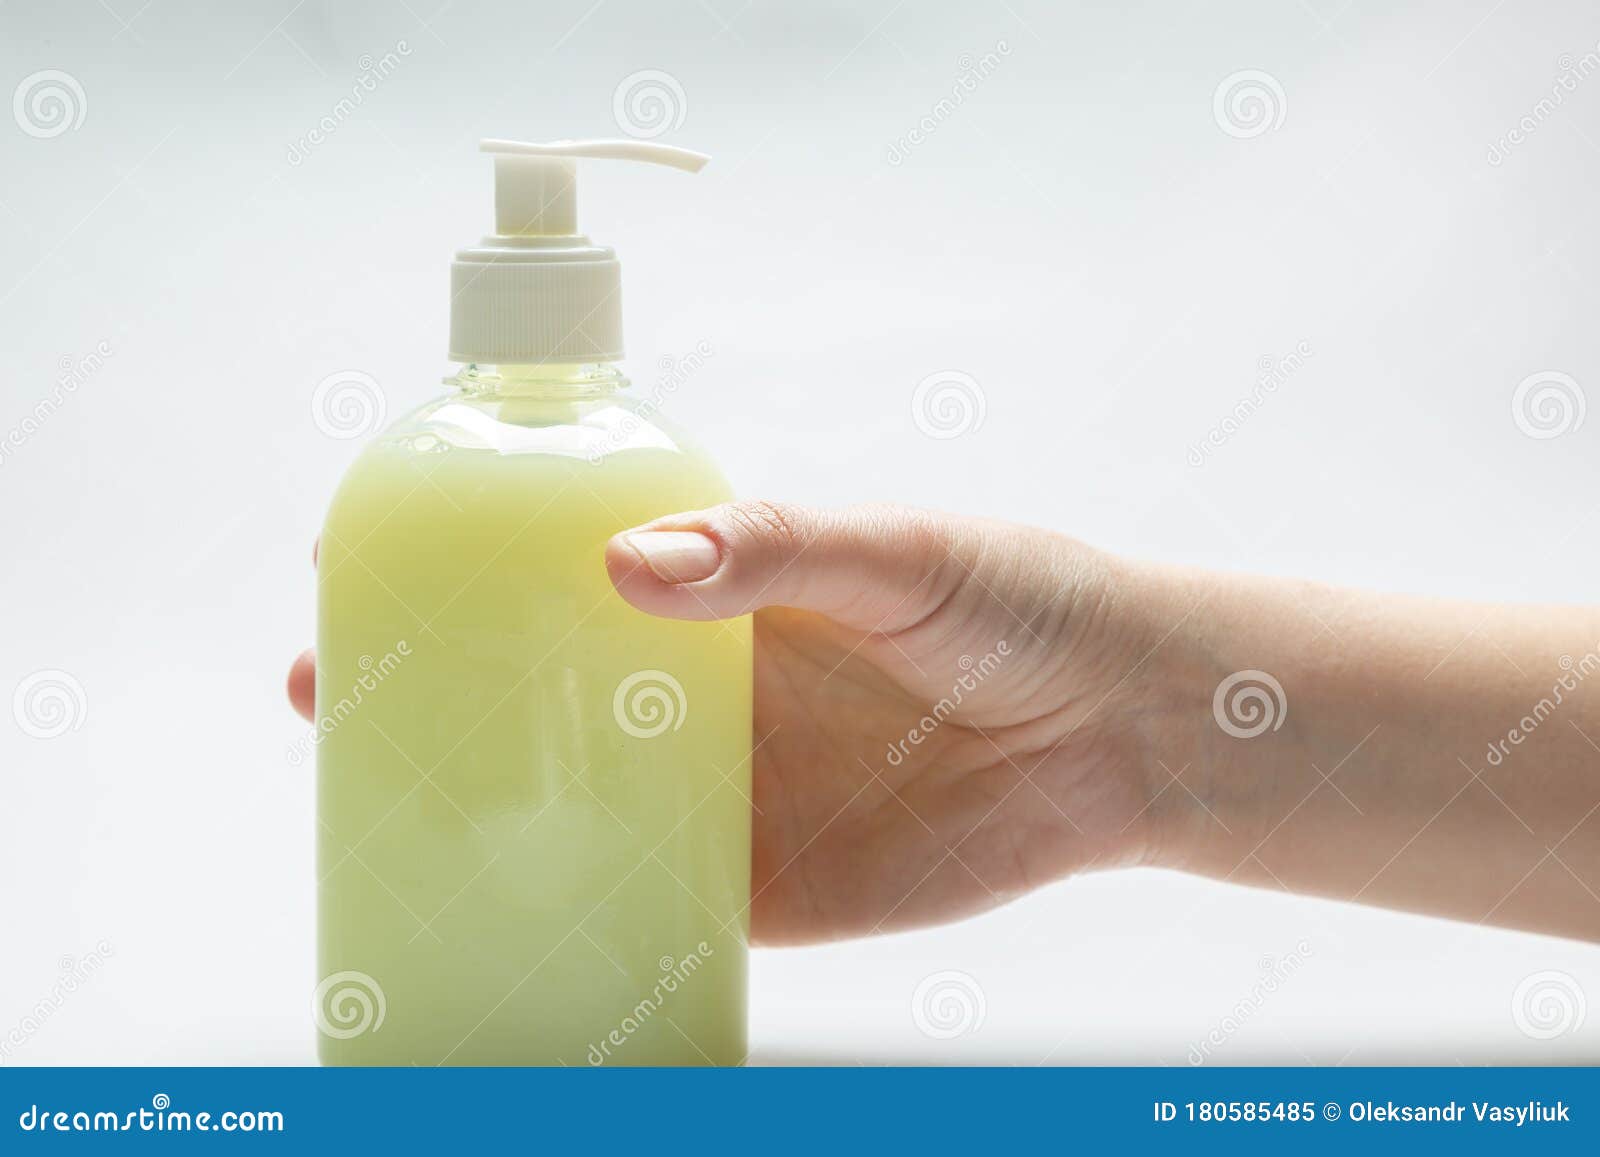 Download 687 Yellow Bottle Liquid Soap Dispenser Photos Free Royalty Free Stock Photos From Dreamstime Yellowimages Mockups